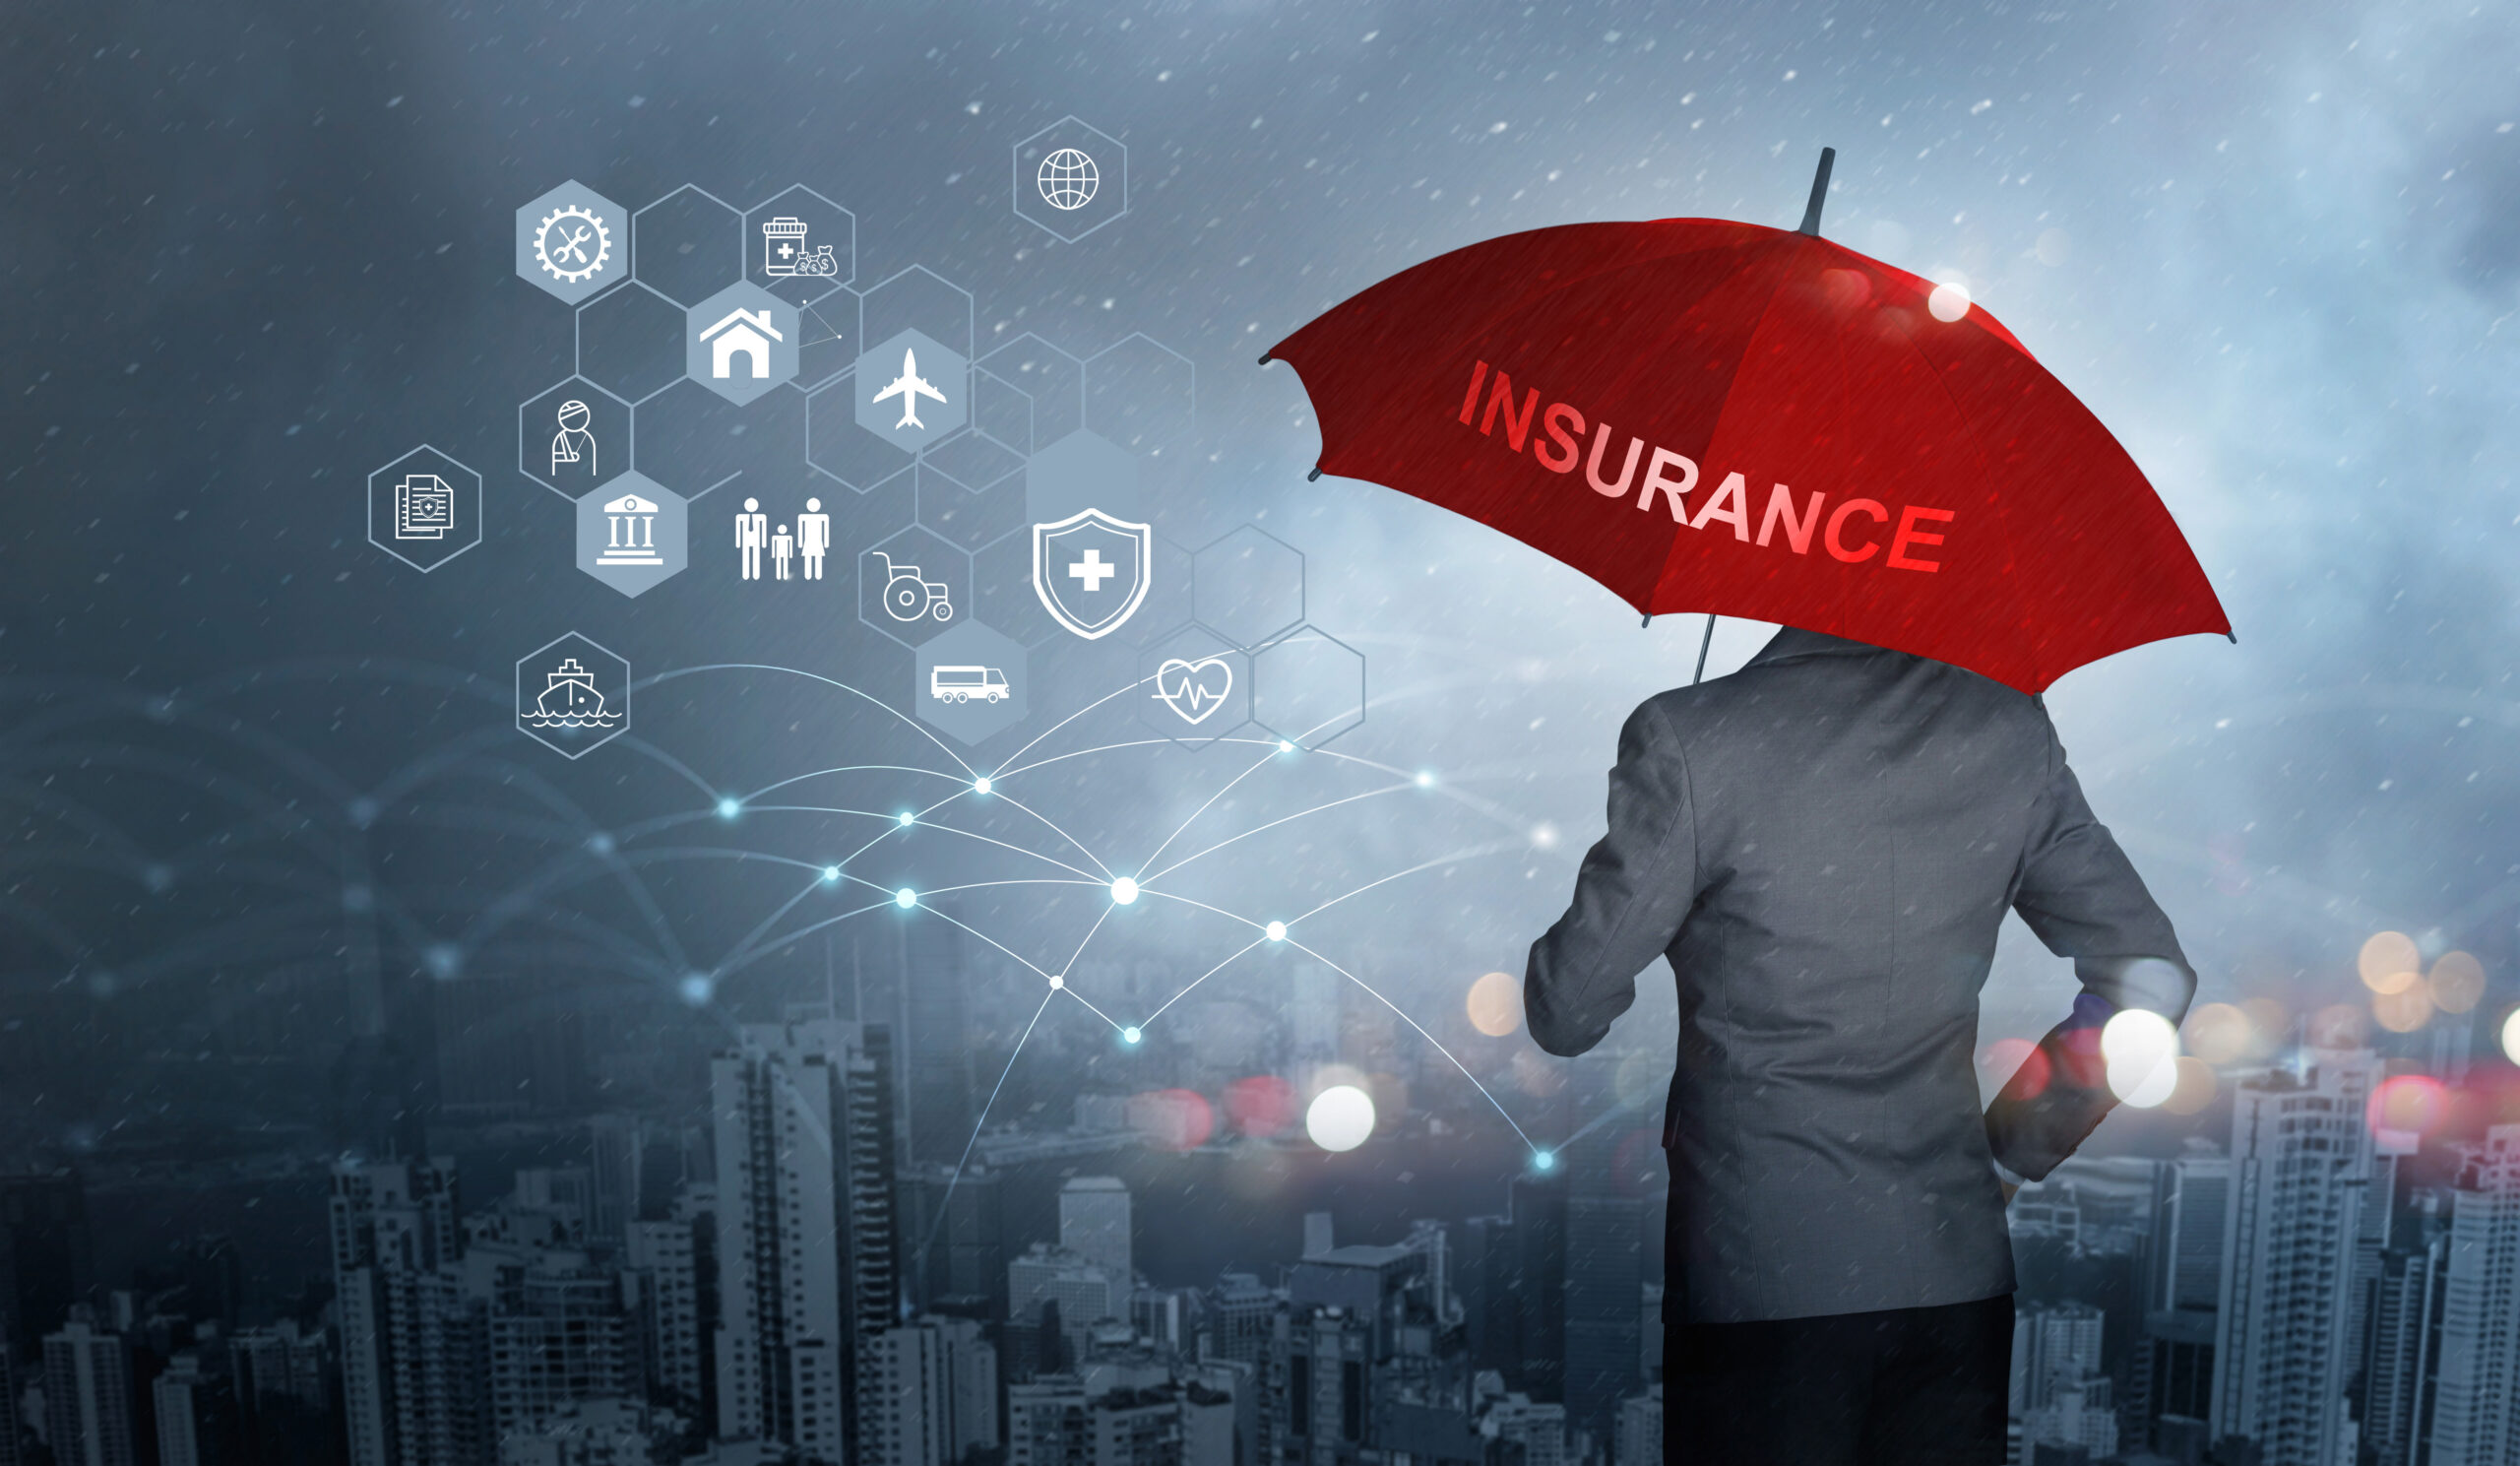 Insurance,Concept,,Businessman,Holding,Red,Umbrella,On,Falling,Rain,With